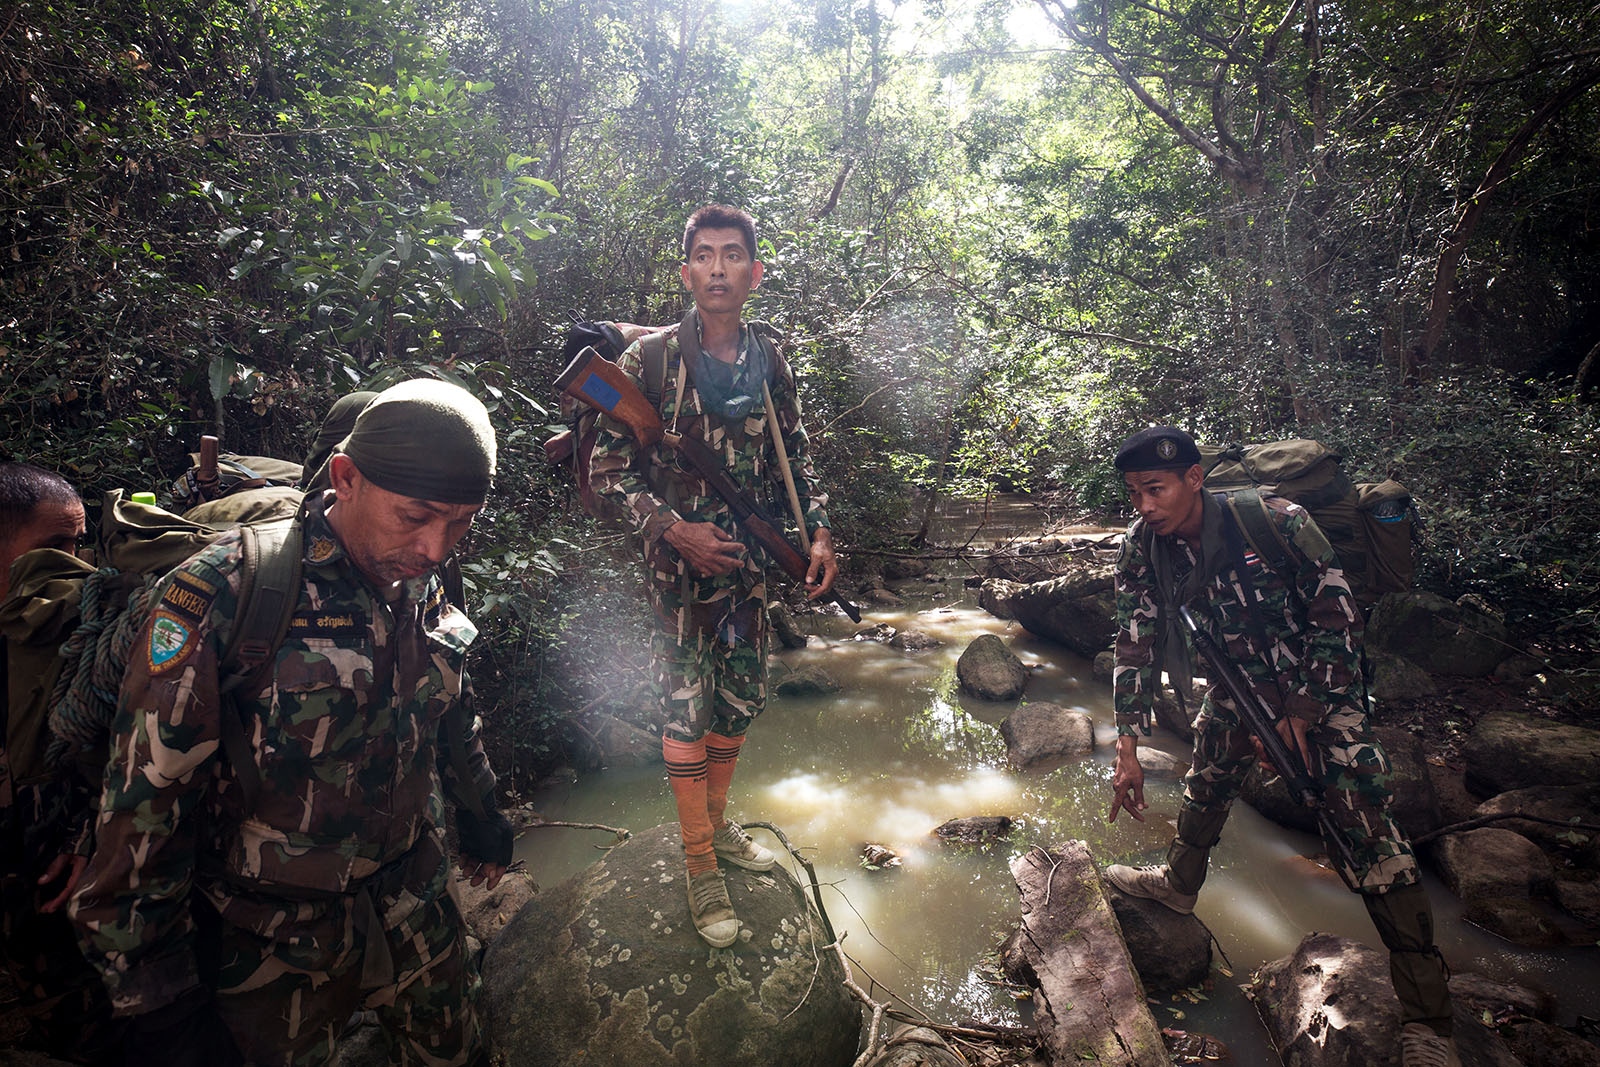 THAILAND'S FOREST RANGERS - Thai forest rangers inspect a well known loggers path and...